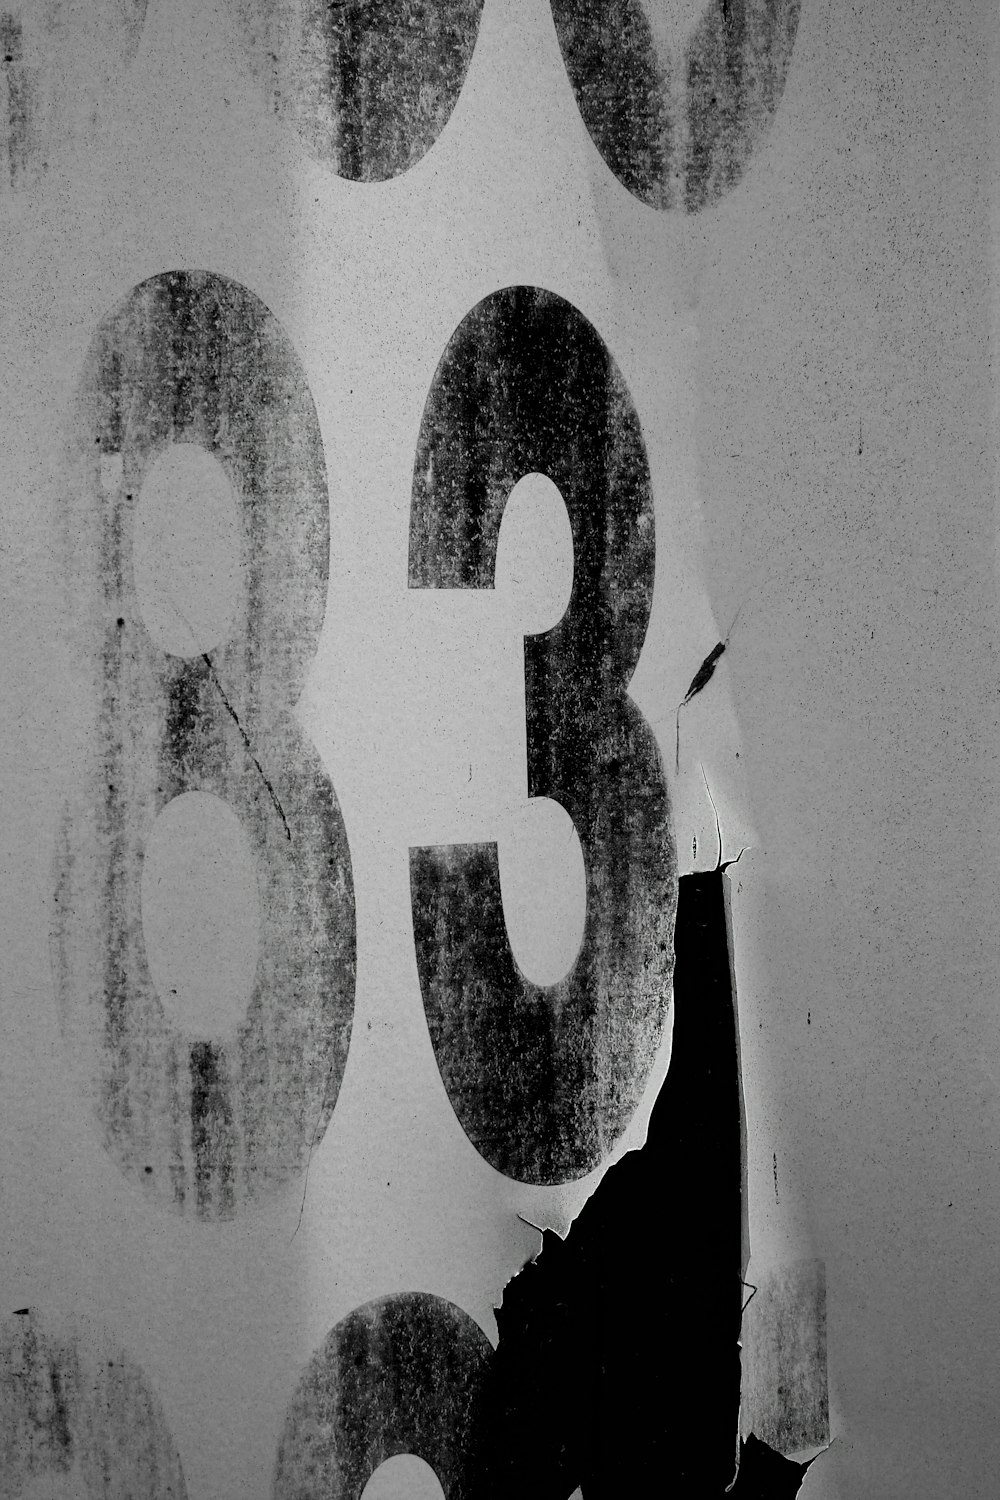 a black and white photo of a person writing numbers on a wall